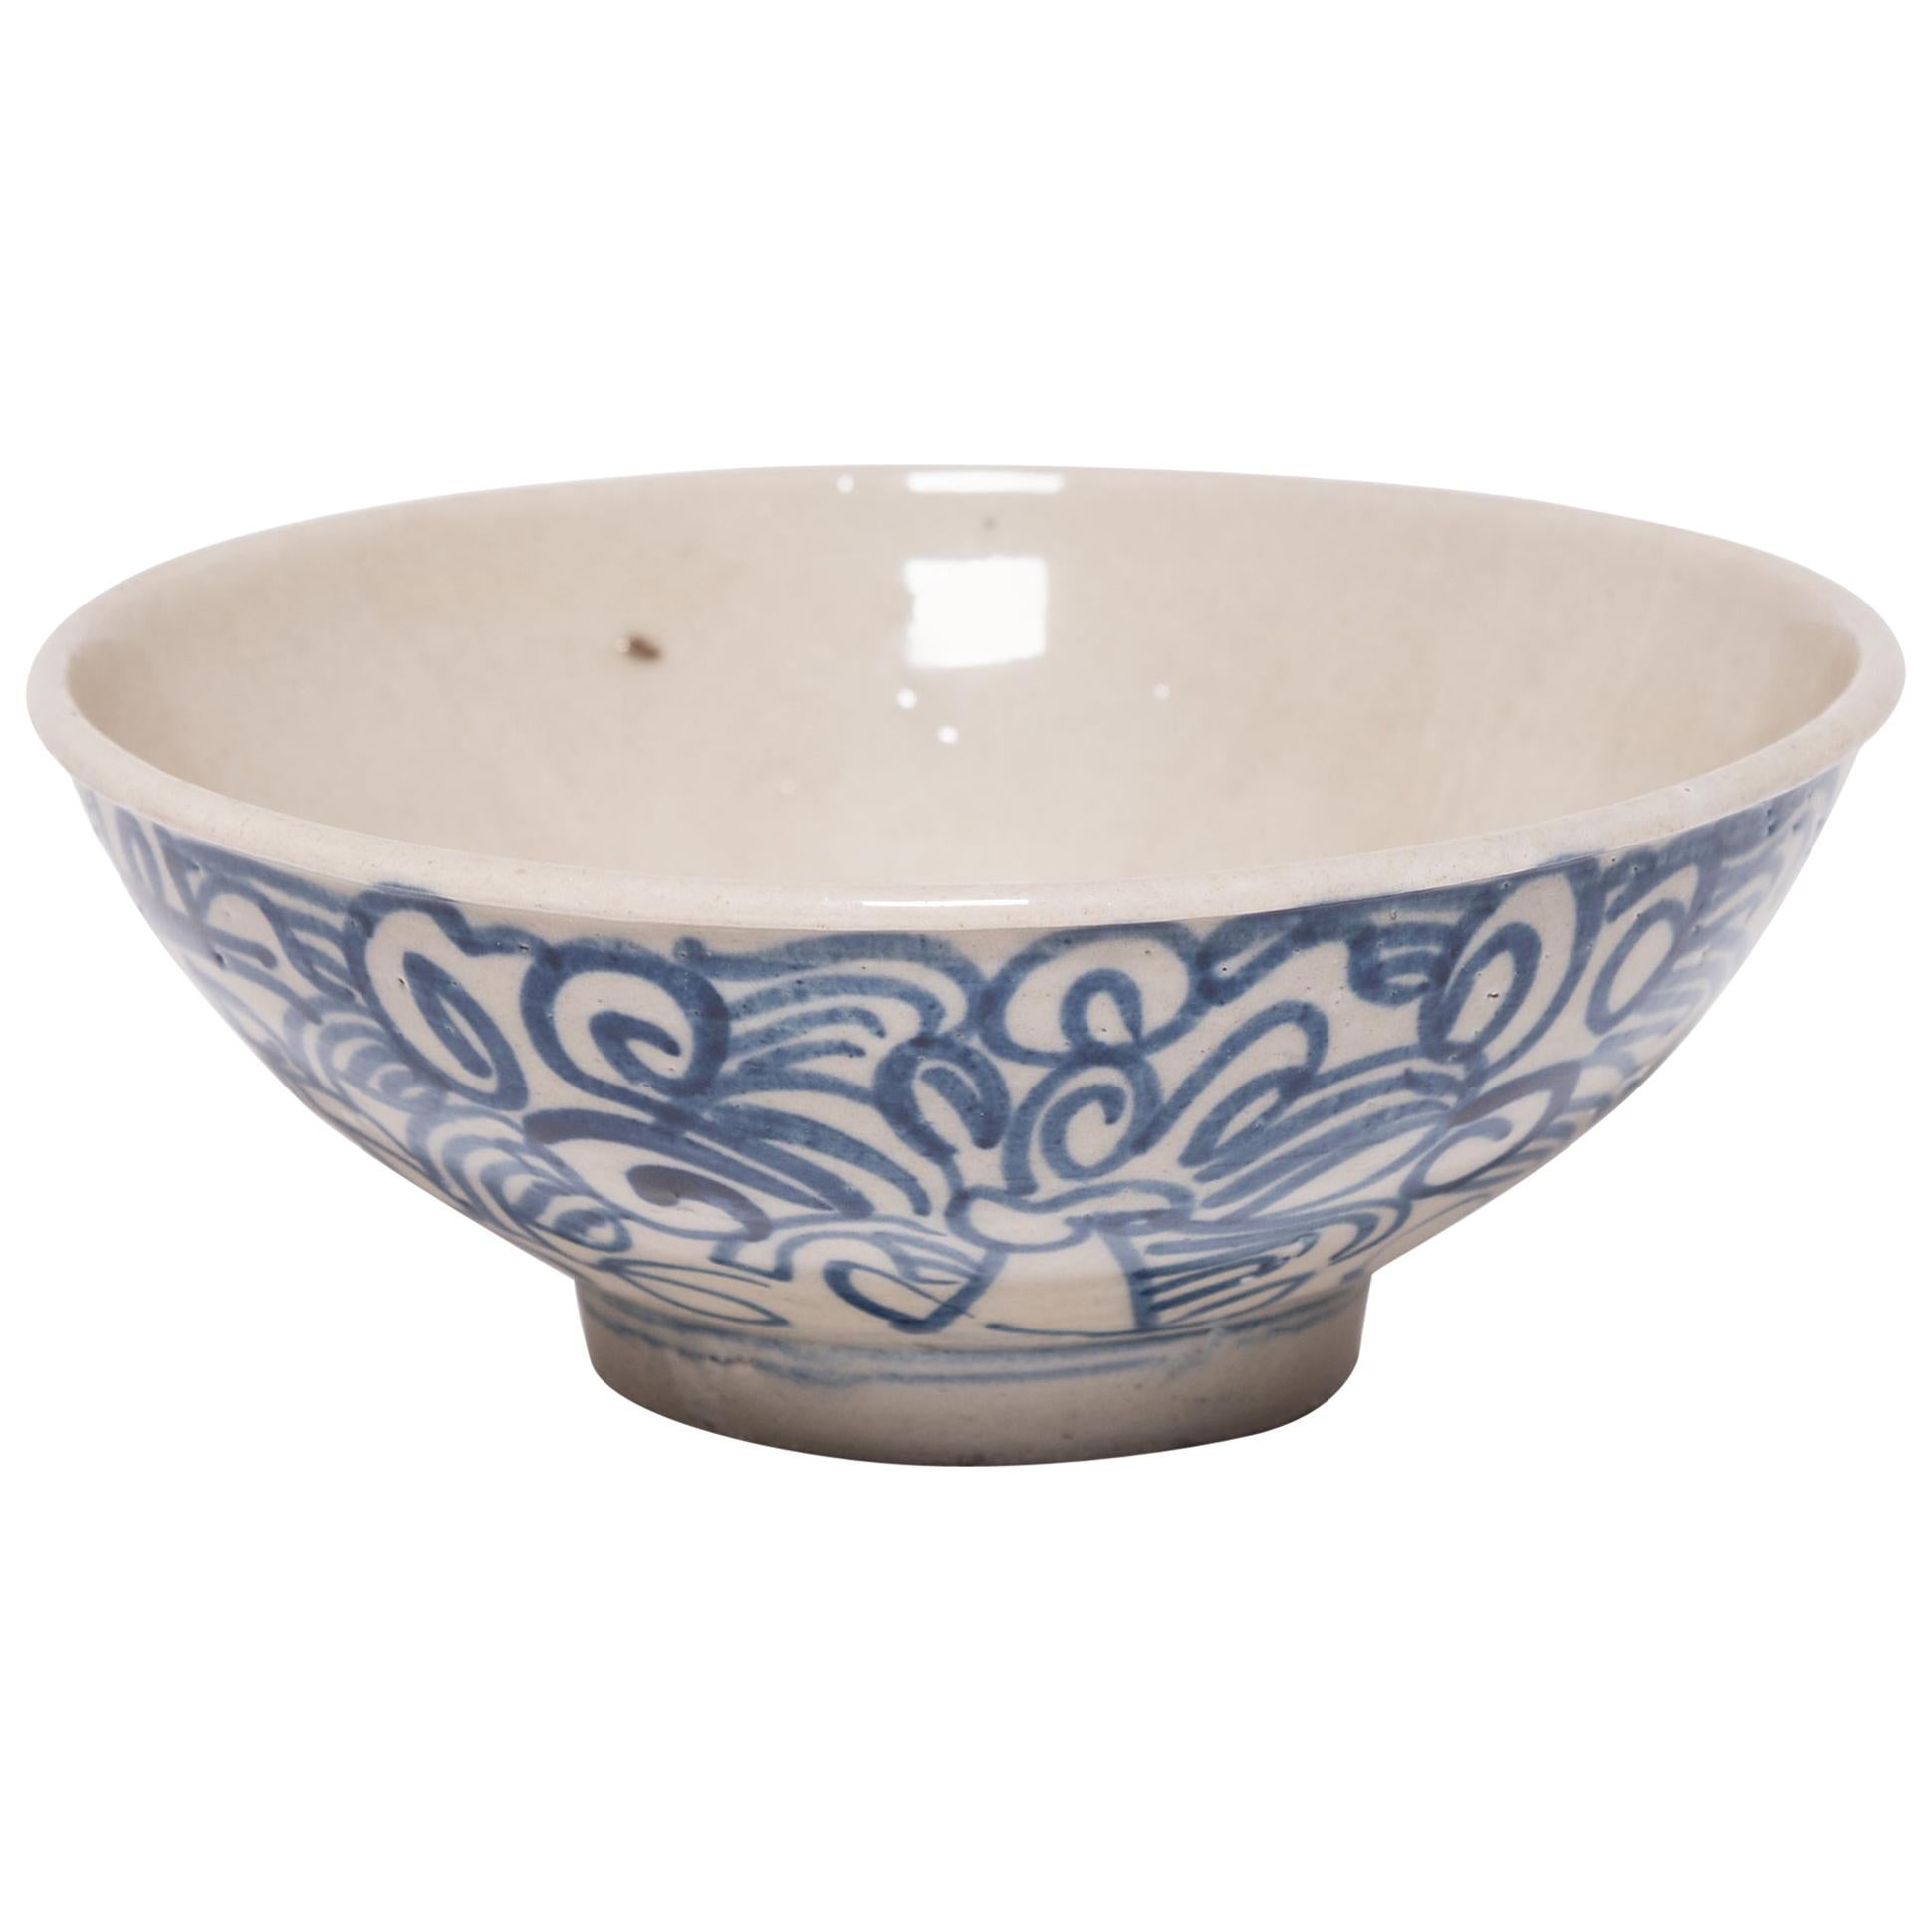 Vintage blue and white bowl